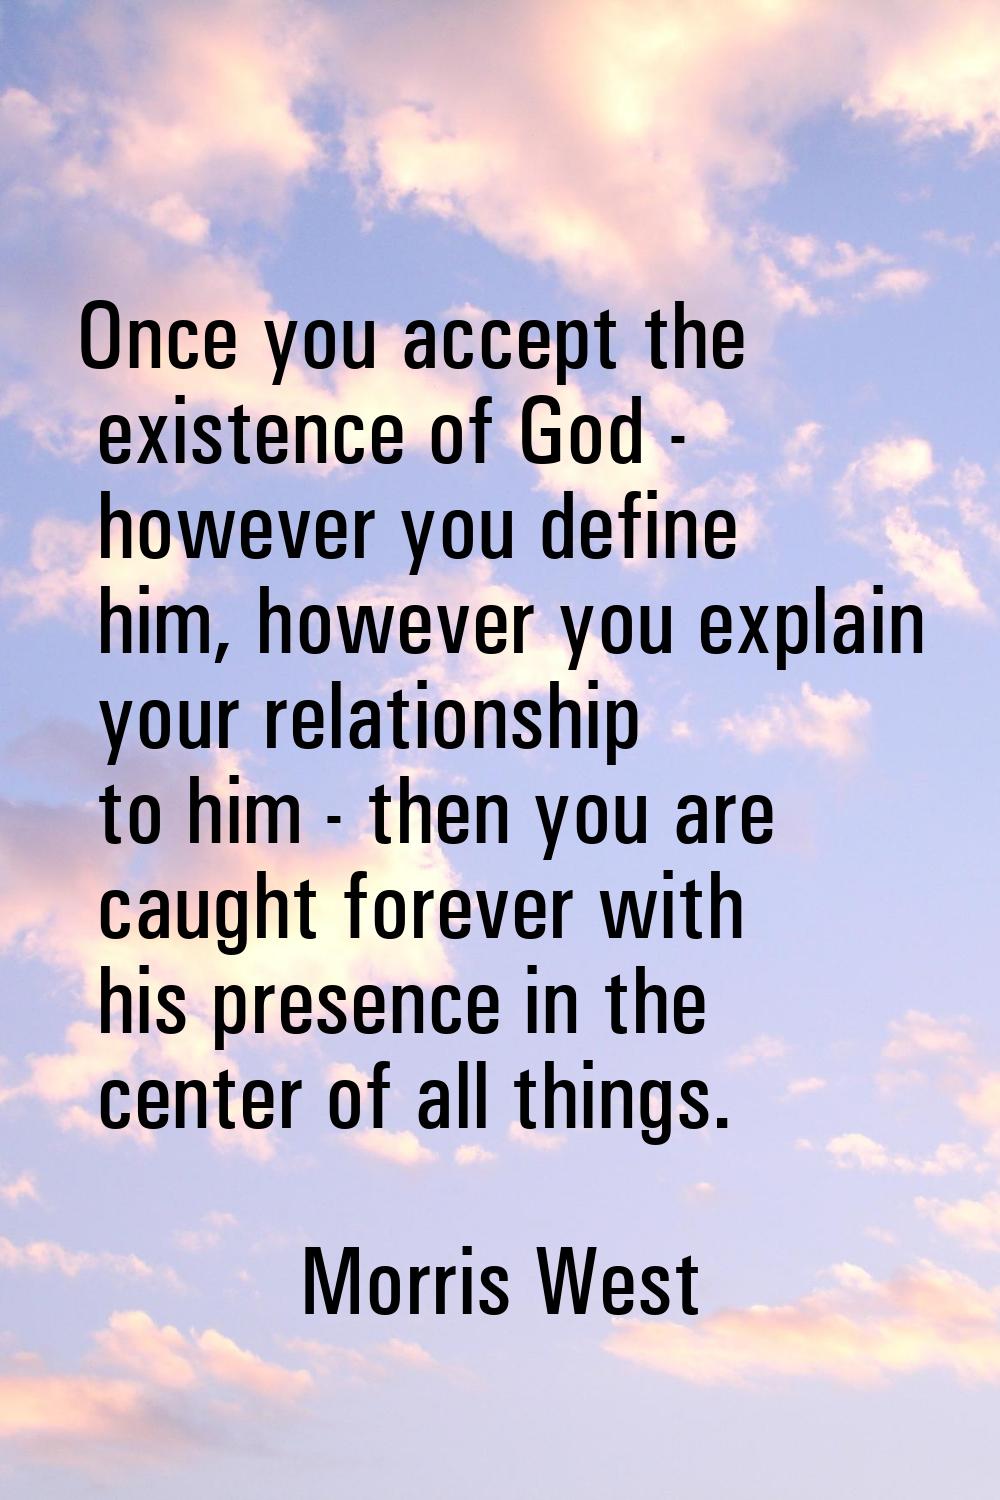 Once you accept the existence of God - however you define him, however you explain your relationshi